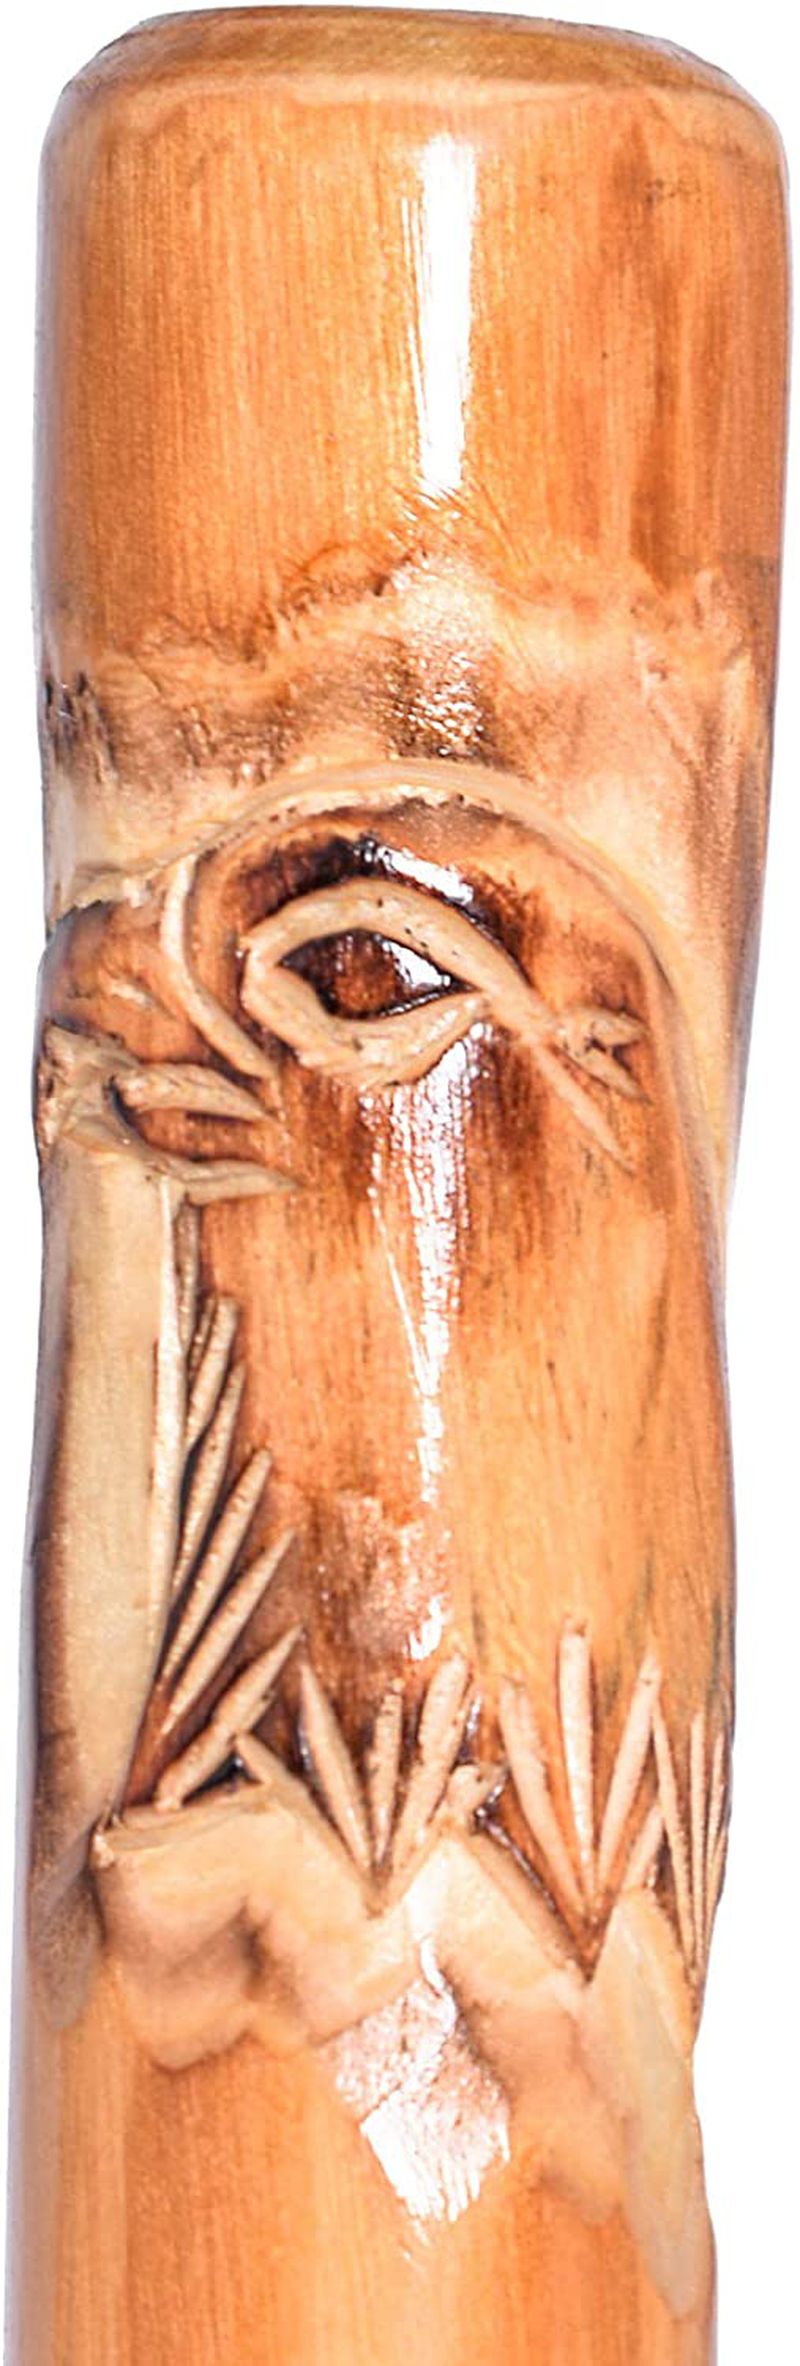 FOREST PILOT 3 Piece Detachable Fir Wood Walking Stick Eagle Carving with a Compass( Nature Color, 55 Inches, 1 Piece)